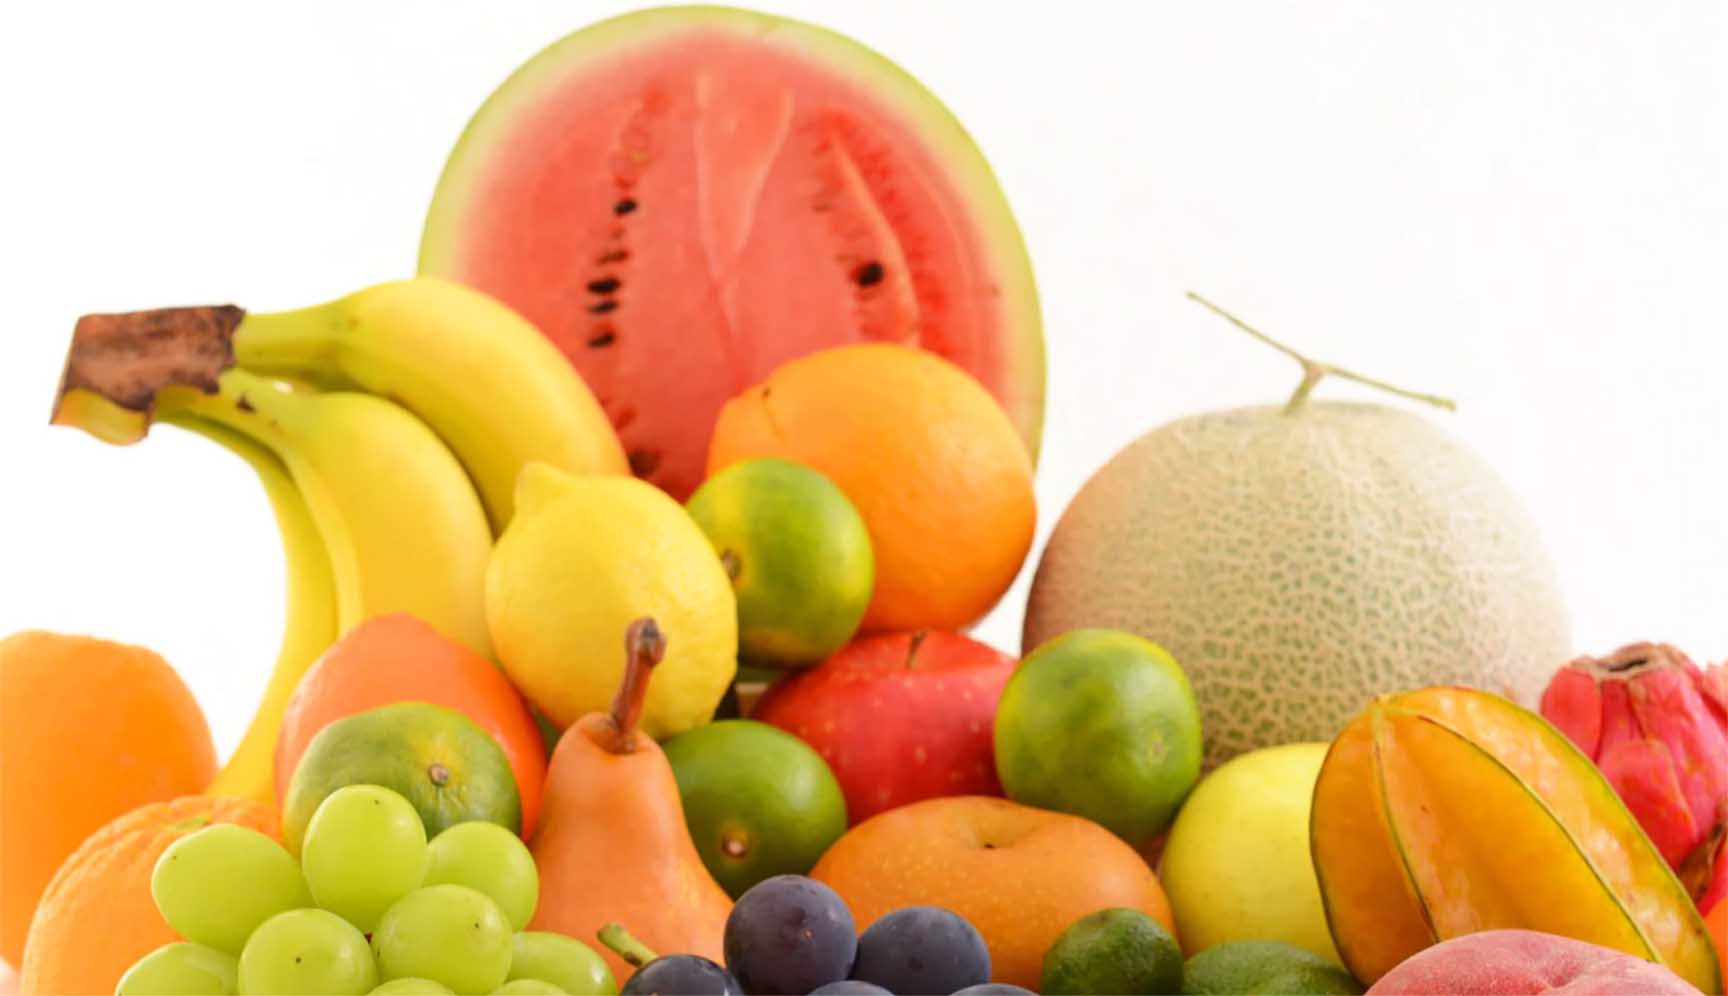 Requirements for fresh fruits and vegetables on the European market